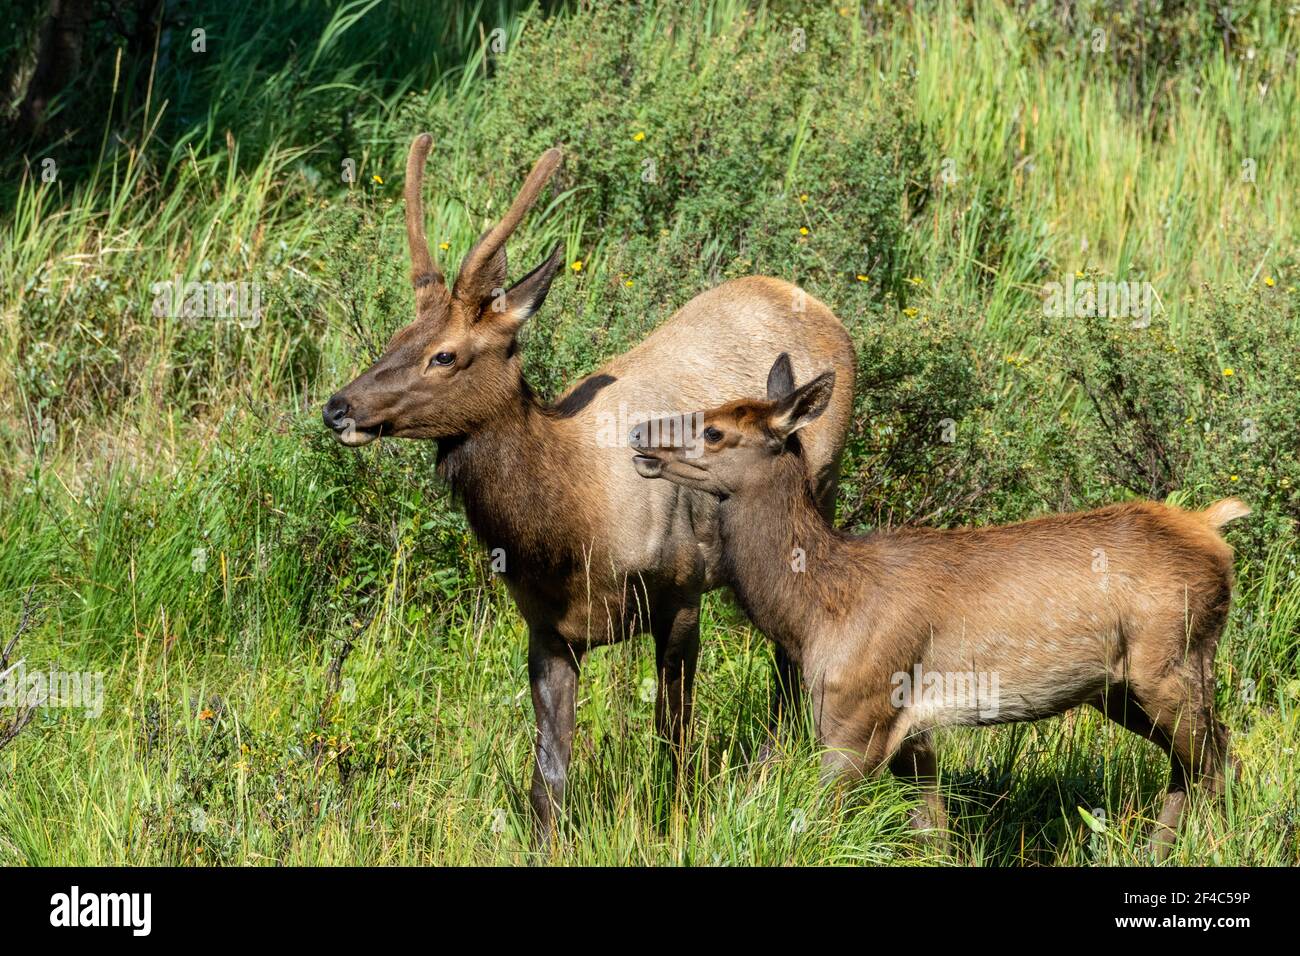 Two elk interacting in a field of grass.  One is a baby elk the other has velvet covered antlers.   . Stock Photo